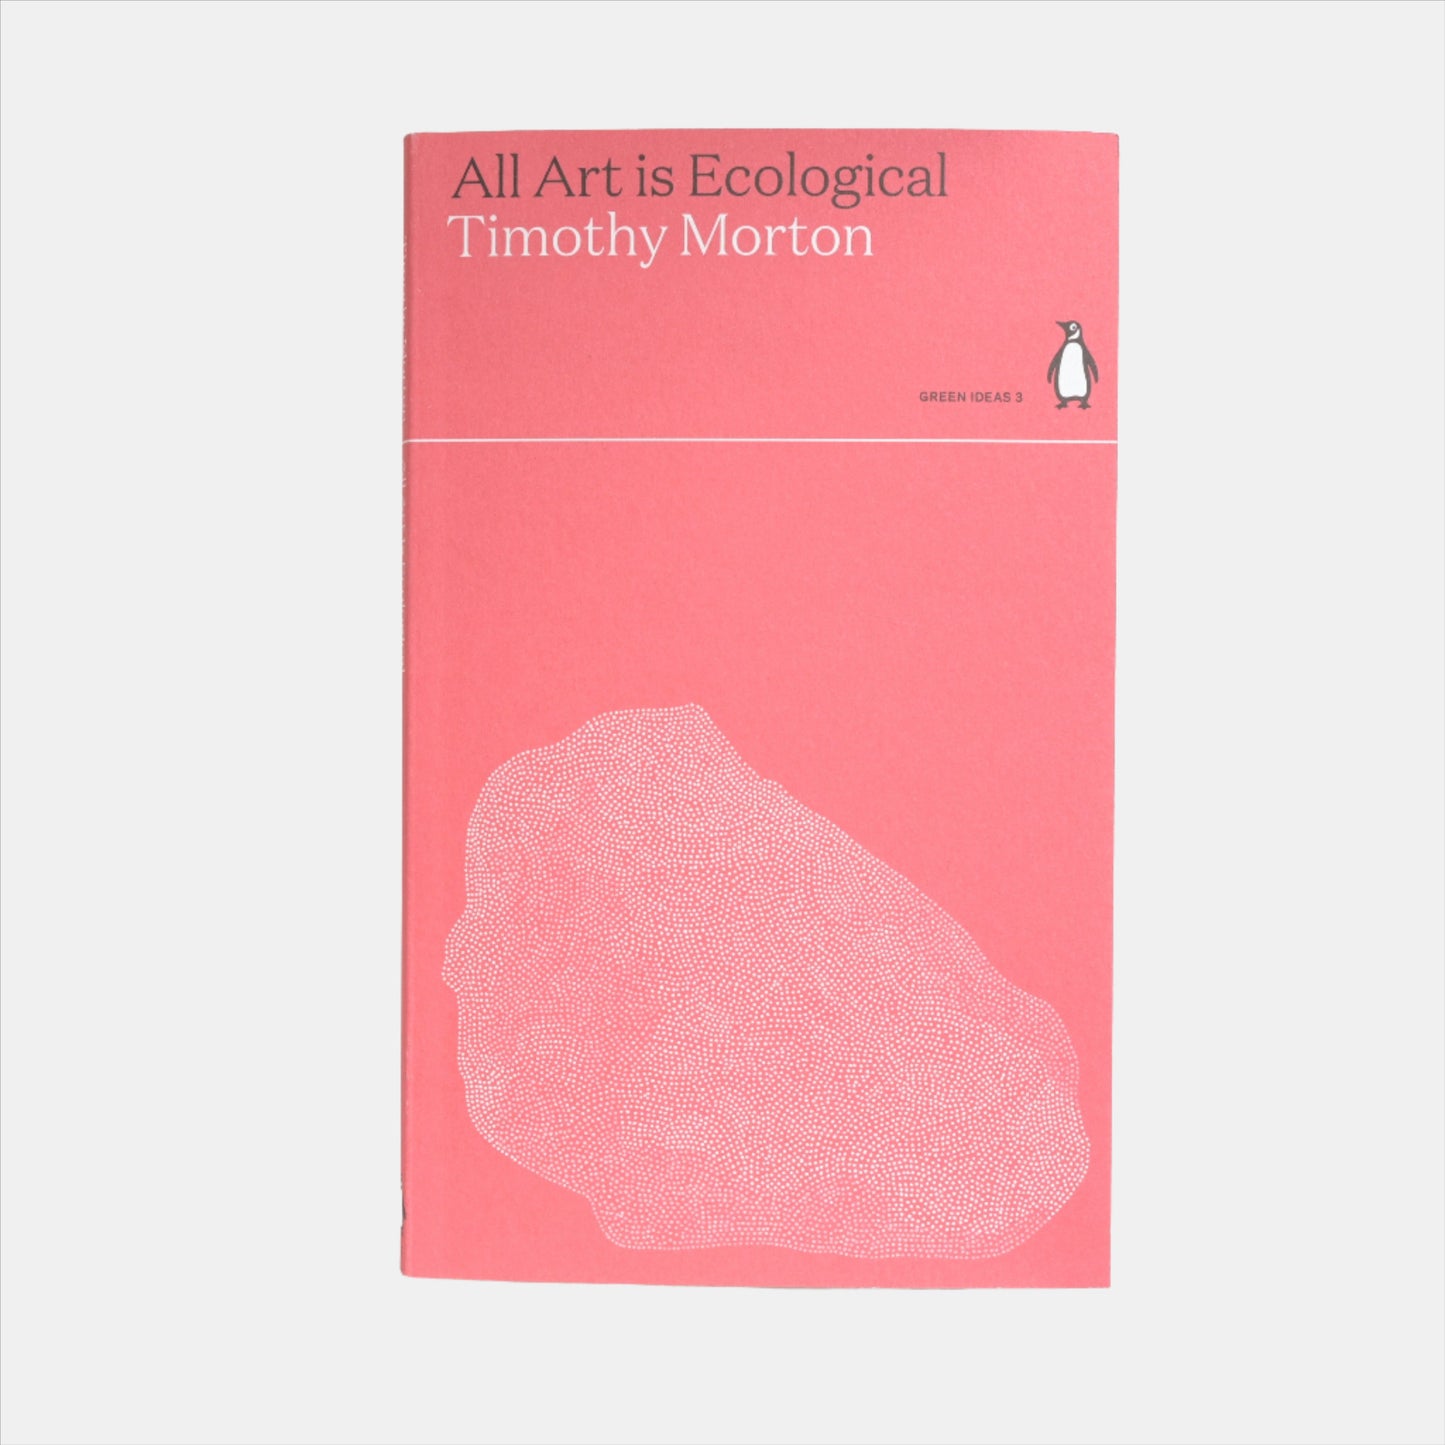 All Art is Ecological: Timothy Morton